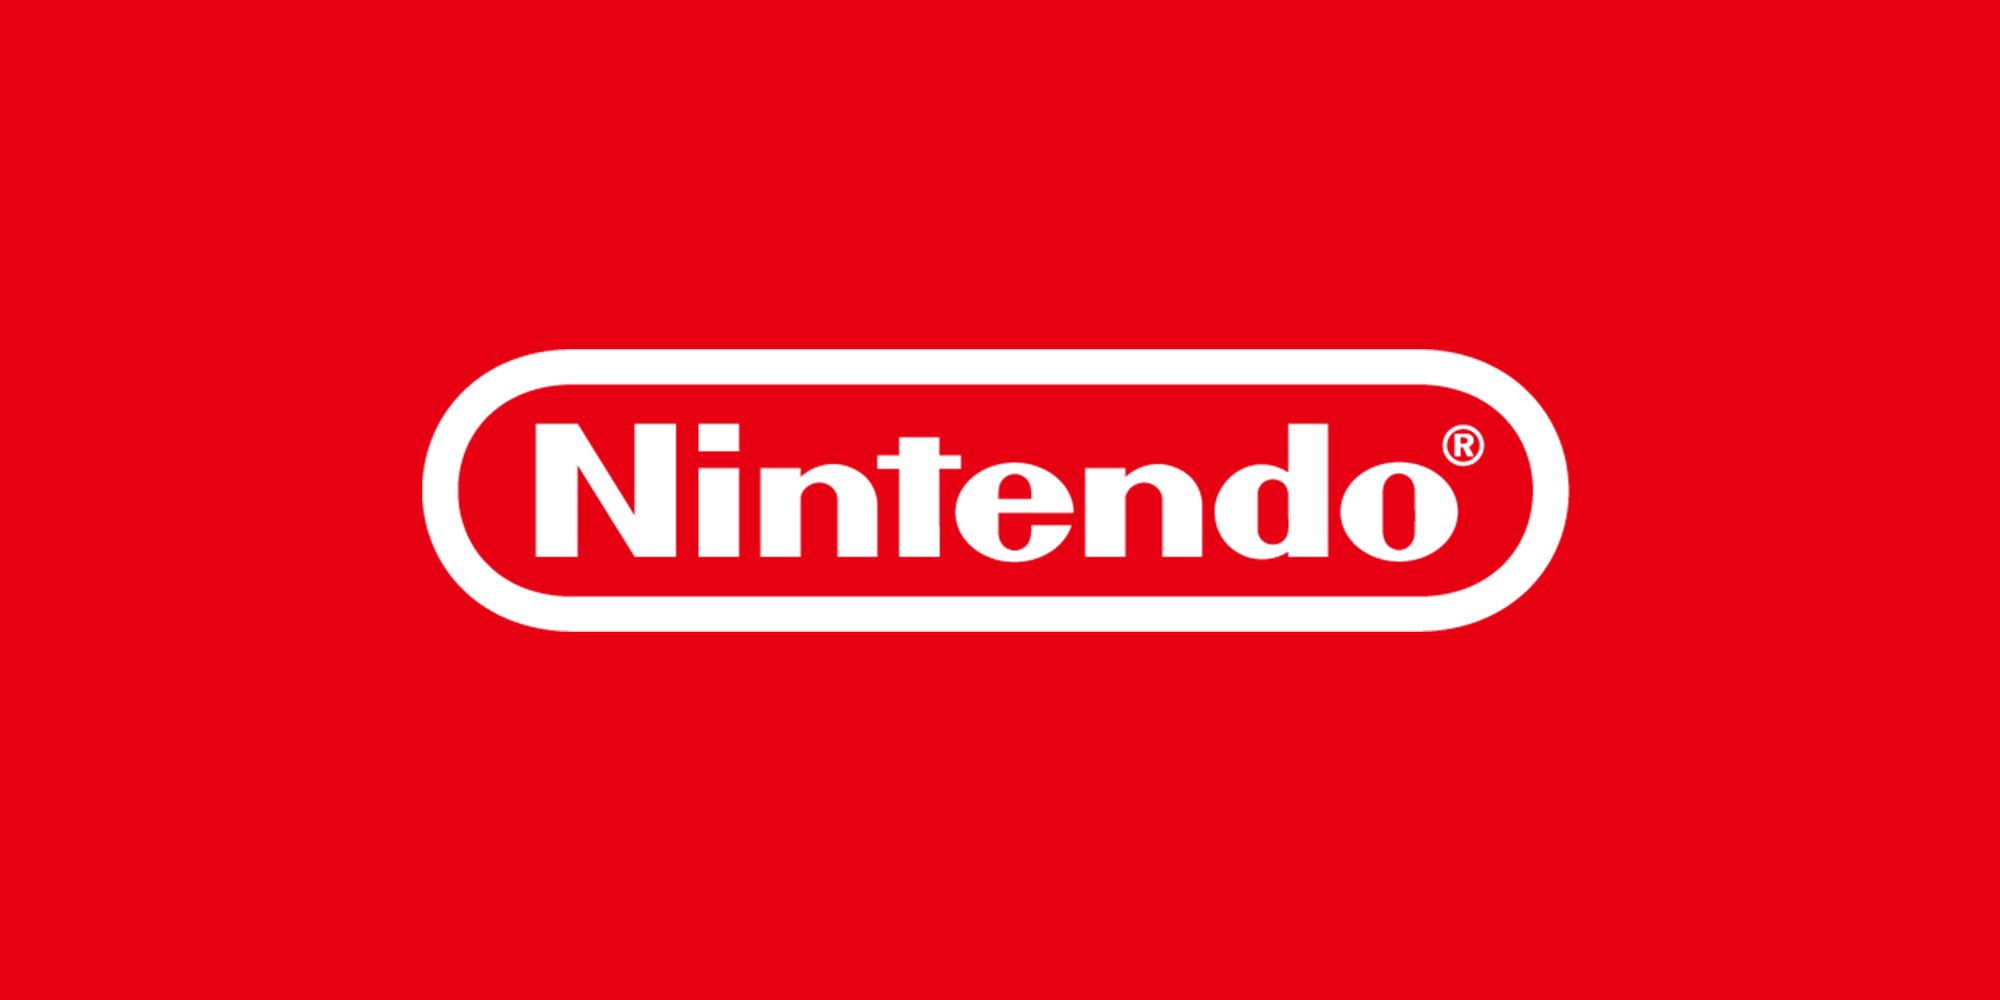 Nintendo Makes A Statement On The Activision Blizzard Scandal